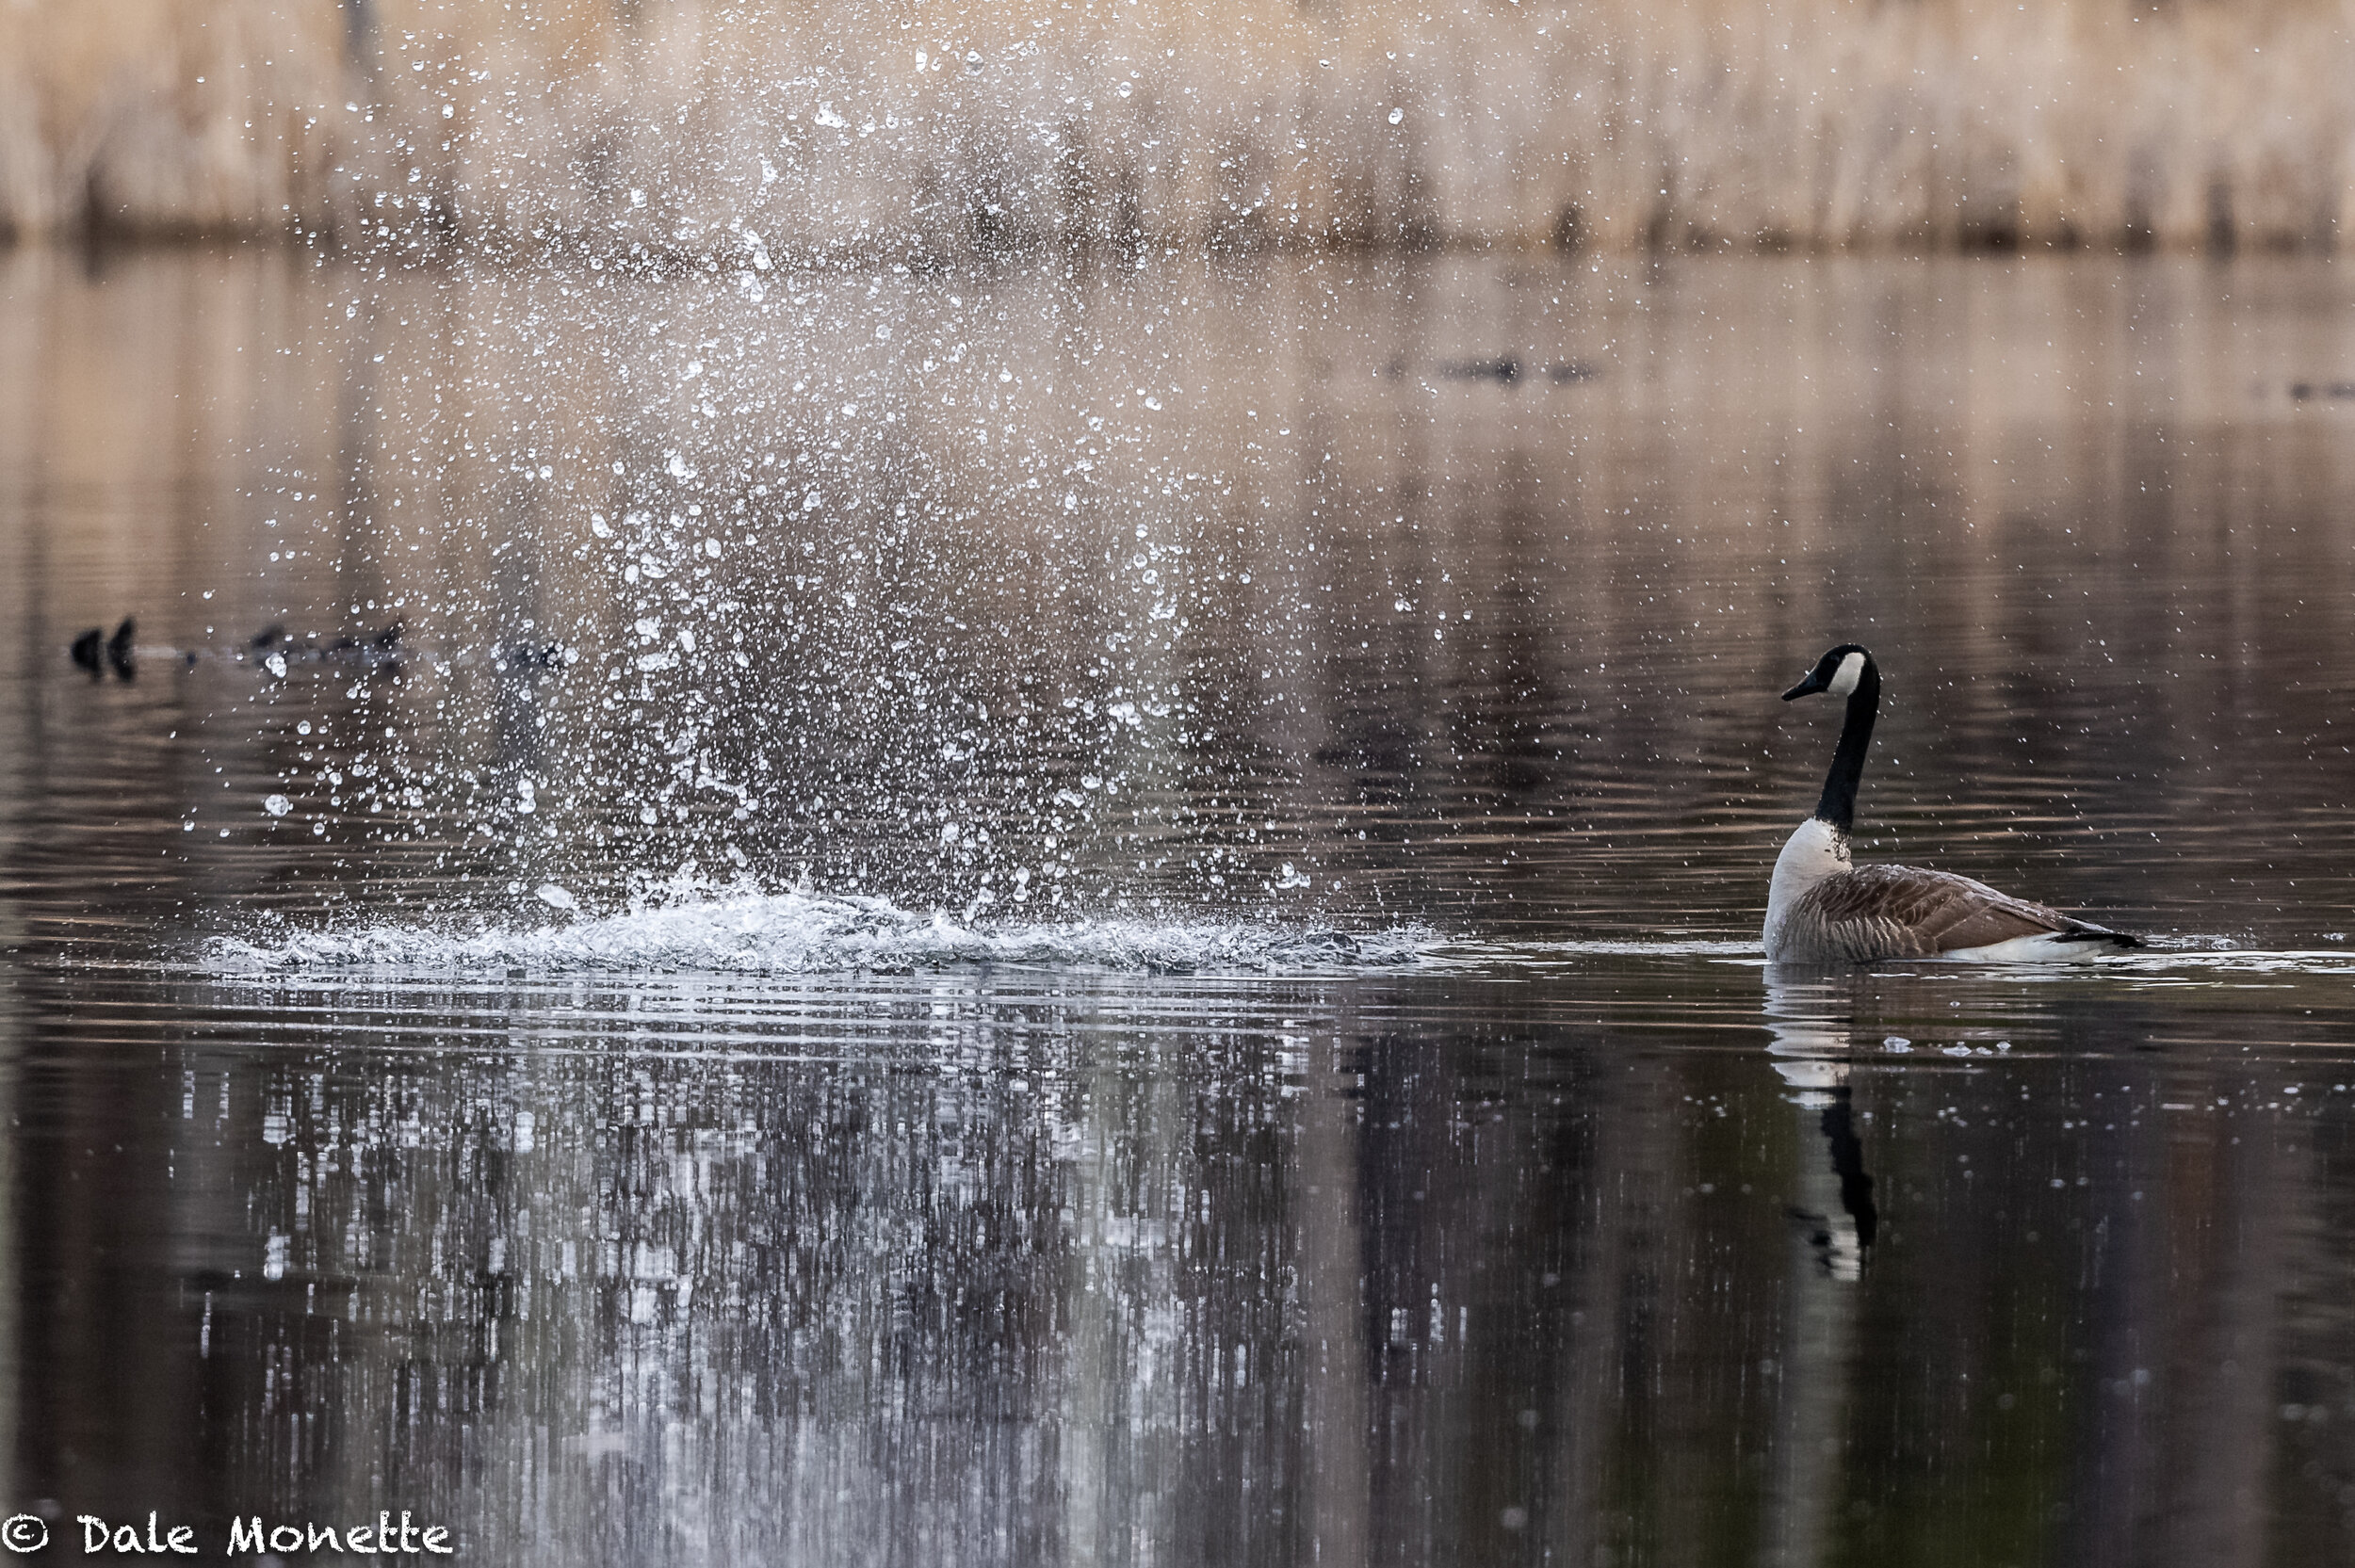   The goose just took it!  There is lots of power in a tail slap and the water sprays upwards of 15 feet. If you look closely you can see the beavers head just in front of the goose…    